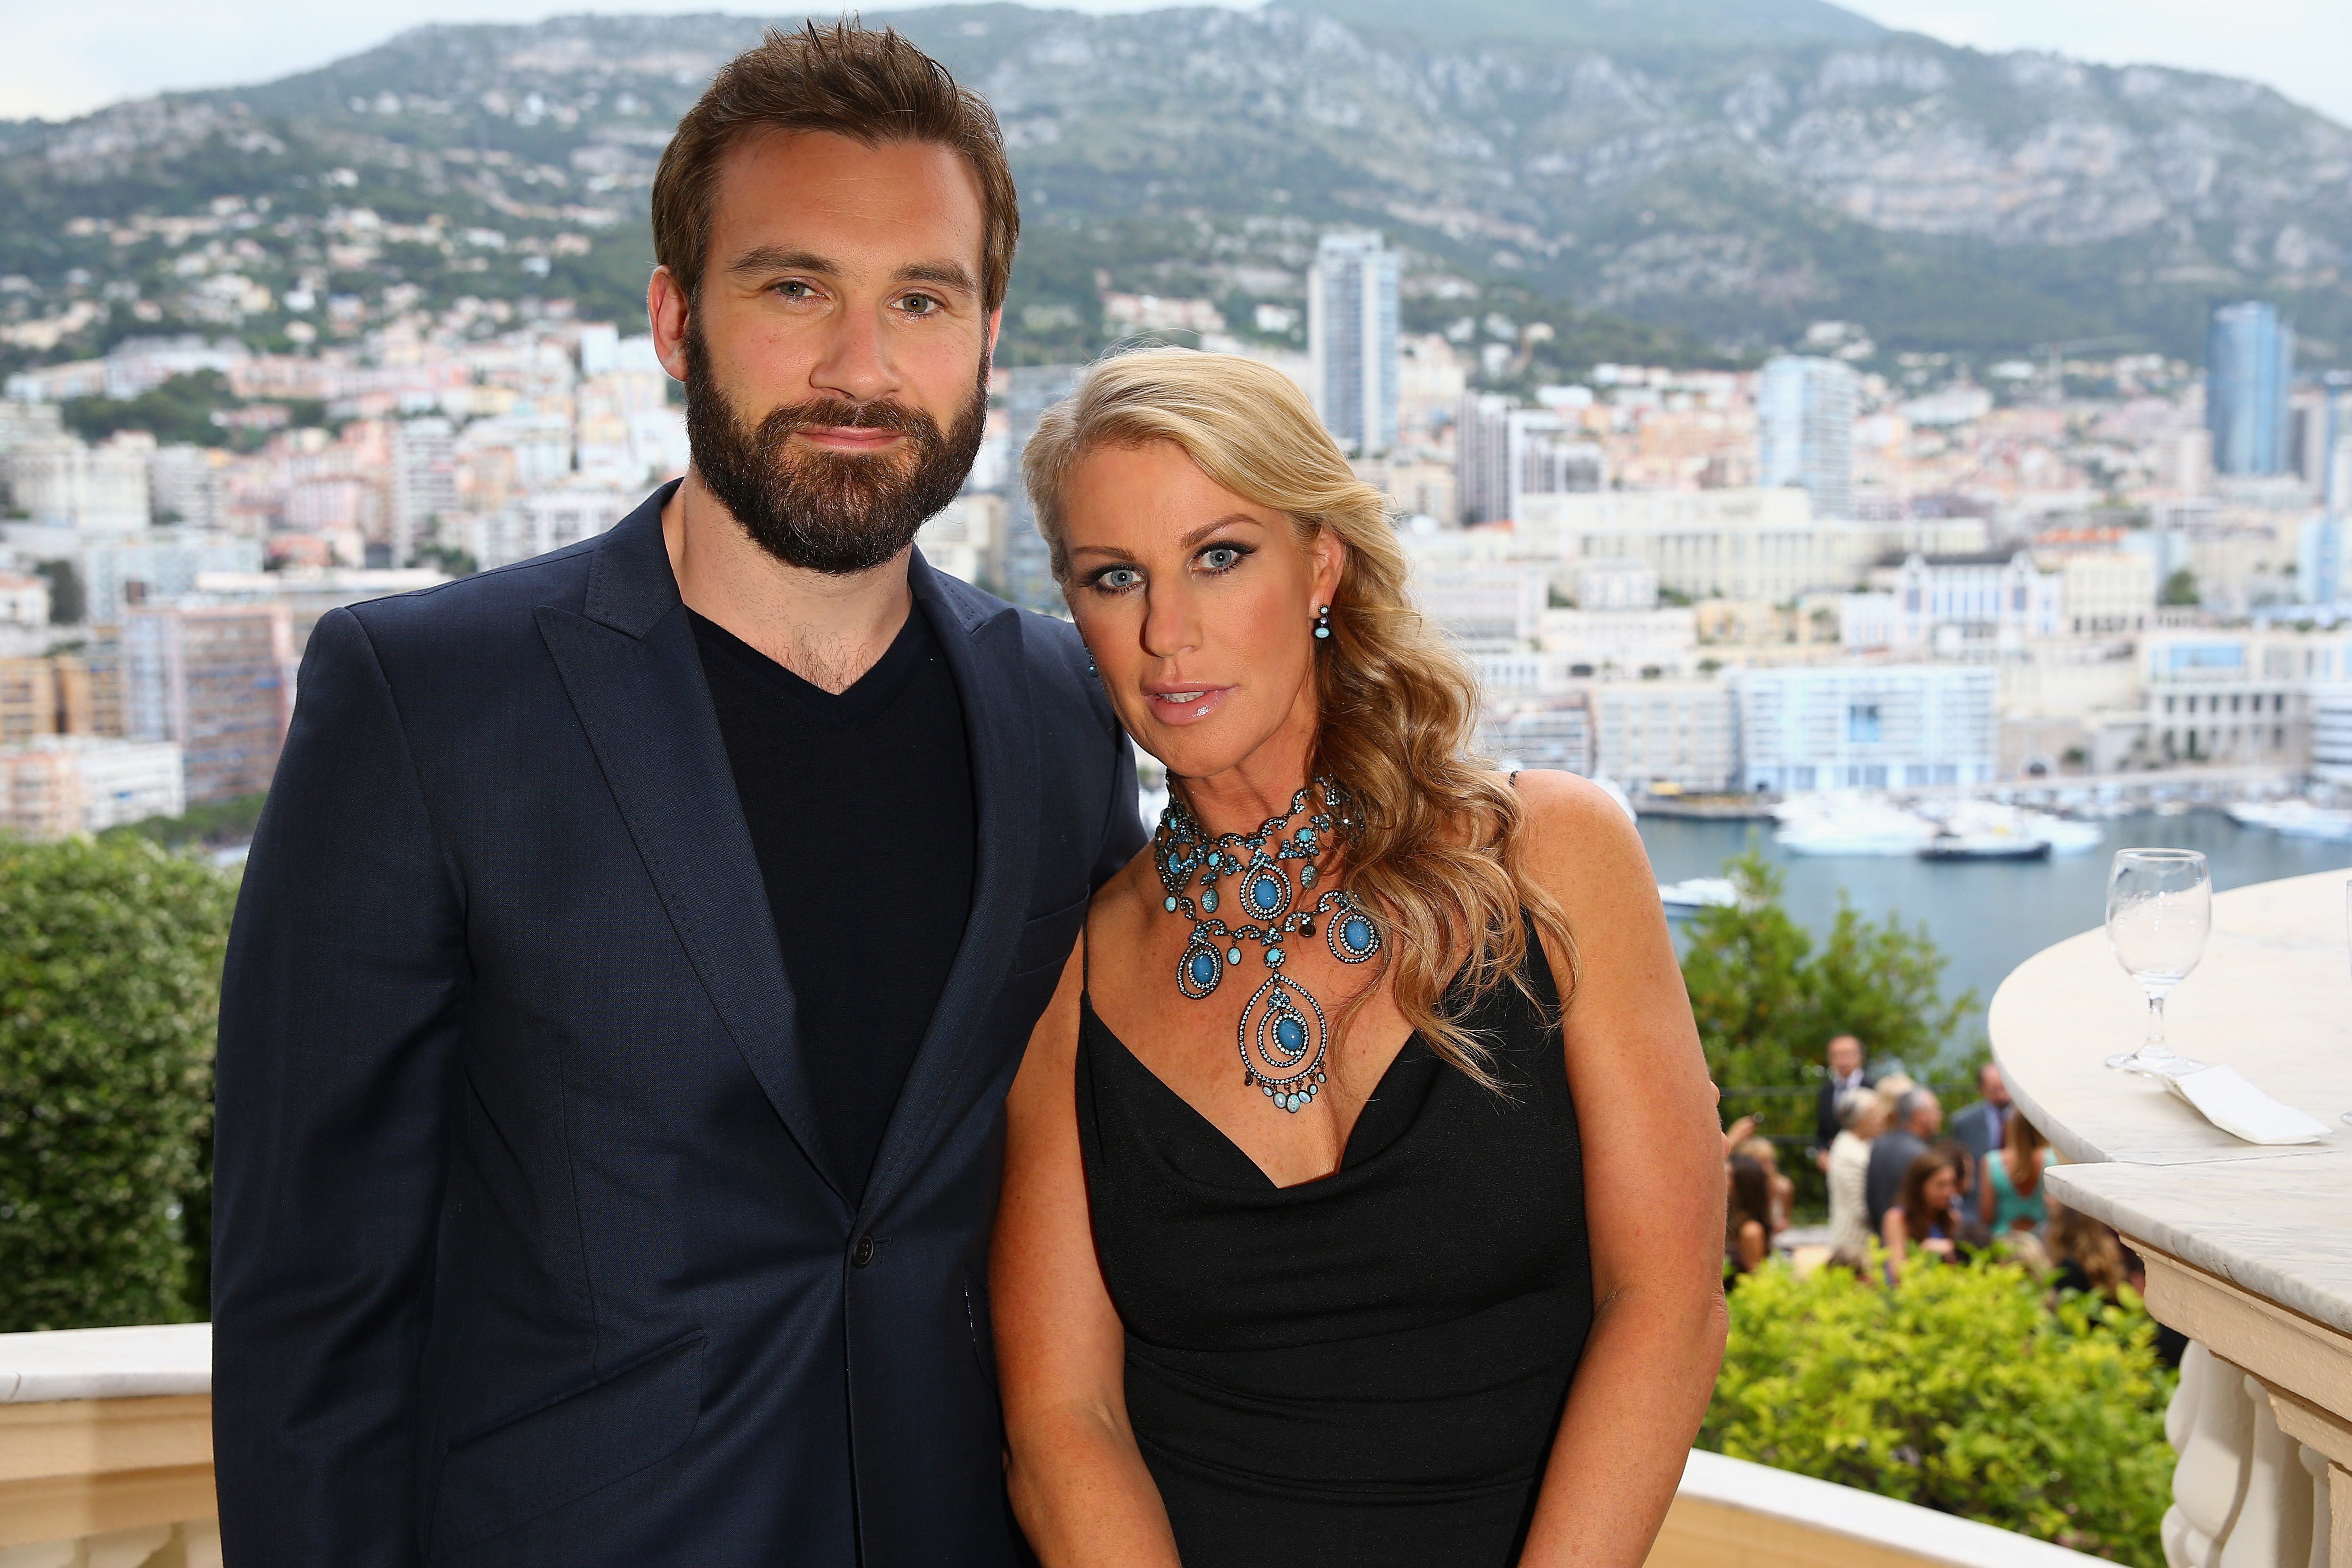 Clive and Francesca Standen attend the 55th Monte Carlo TV Festival on June 15, 2015, in Monaco. | Source: Getty Images